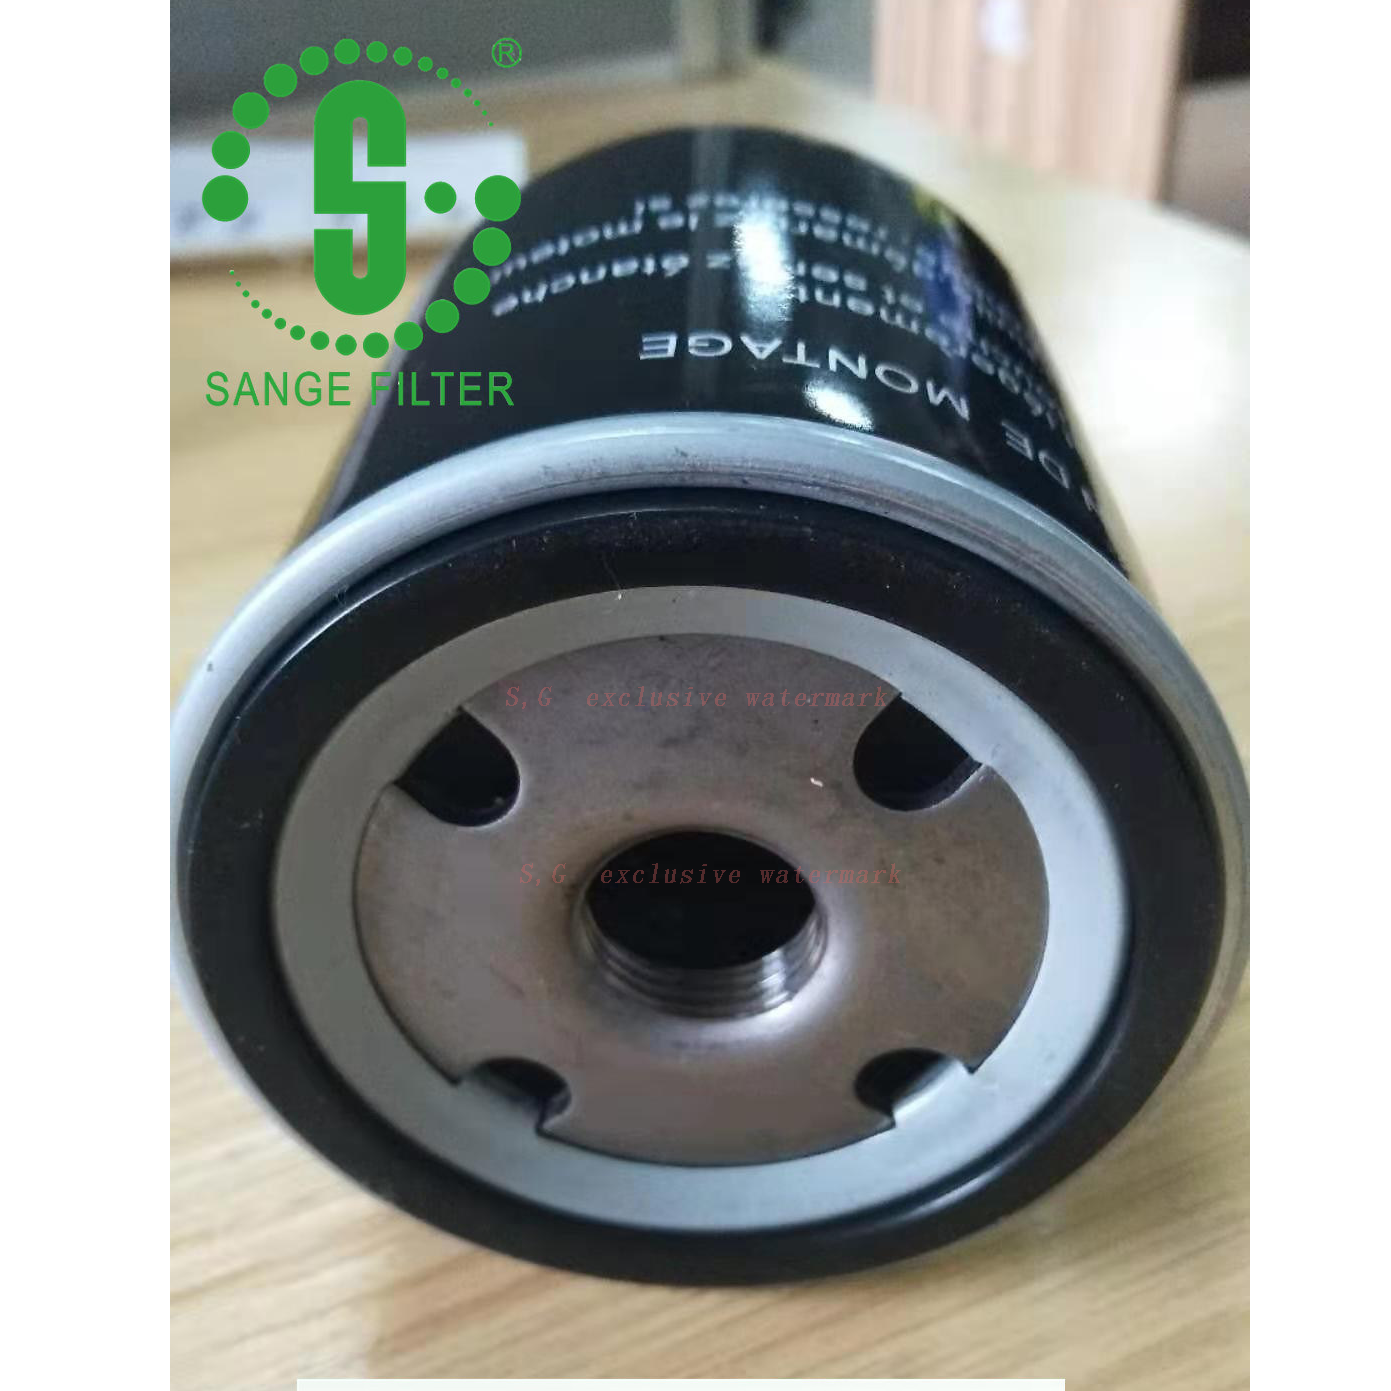 Air compressor oil filter element oil check 57562 SH 62172 NO 011980 Quality filter element maintenance replacement parts